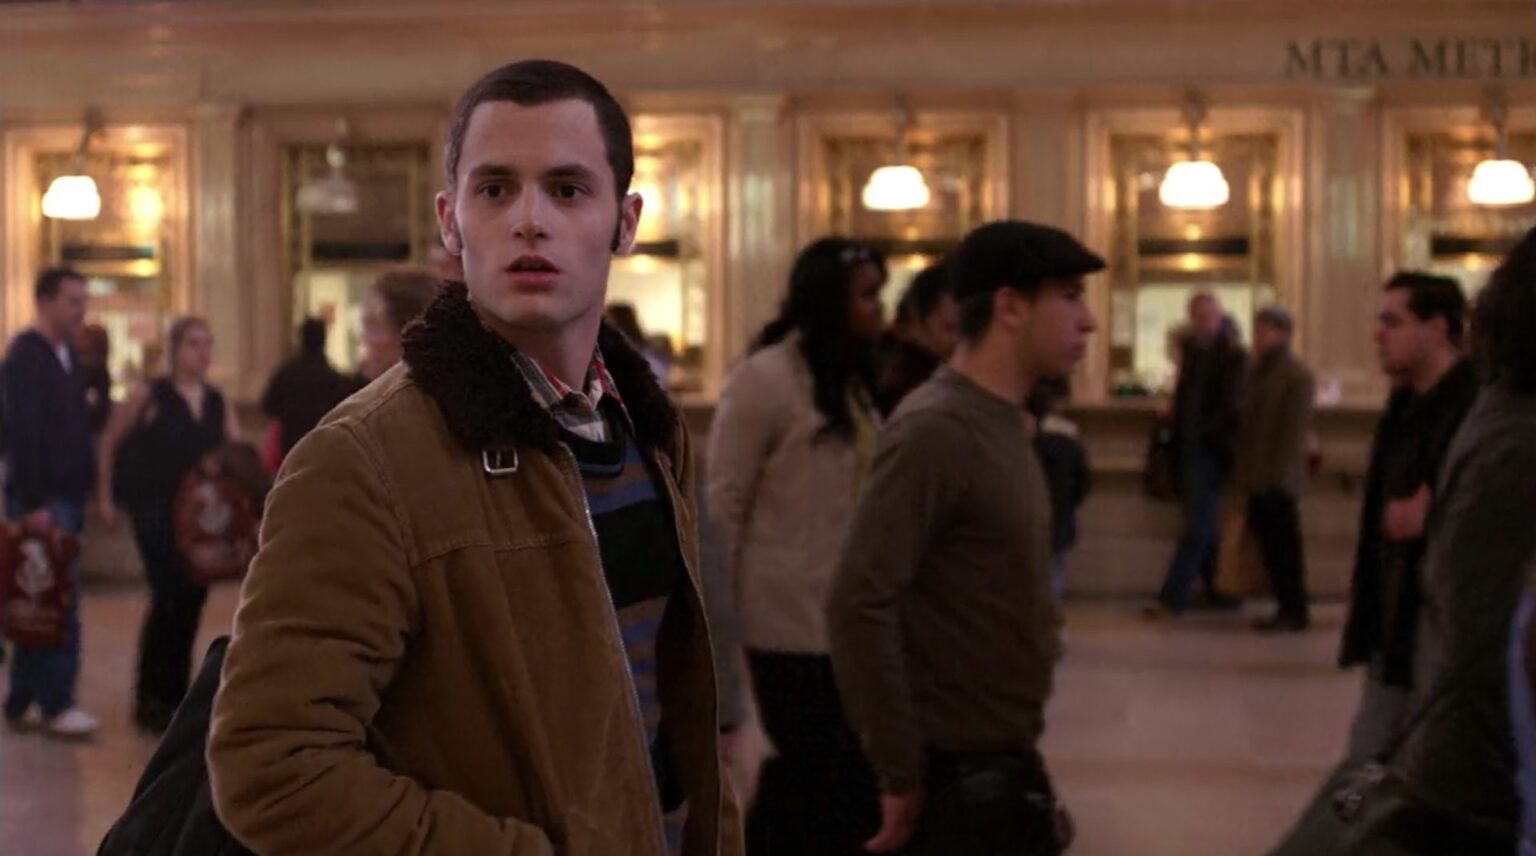 Now that the 'Gossip Girl' reboot is getting closer, it’s a great time to reflect on the cringy character Dan Humphrey. Why is he such a creep?